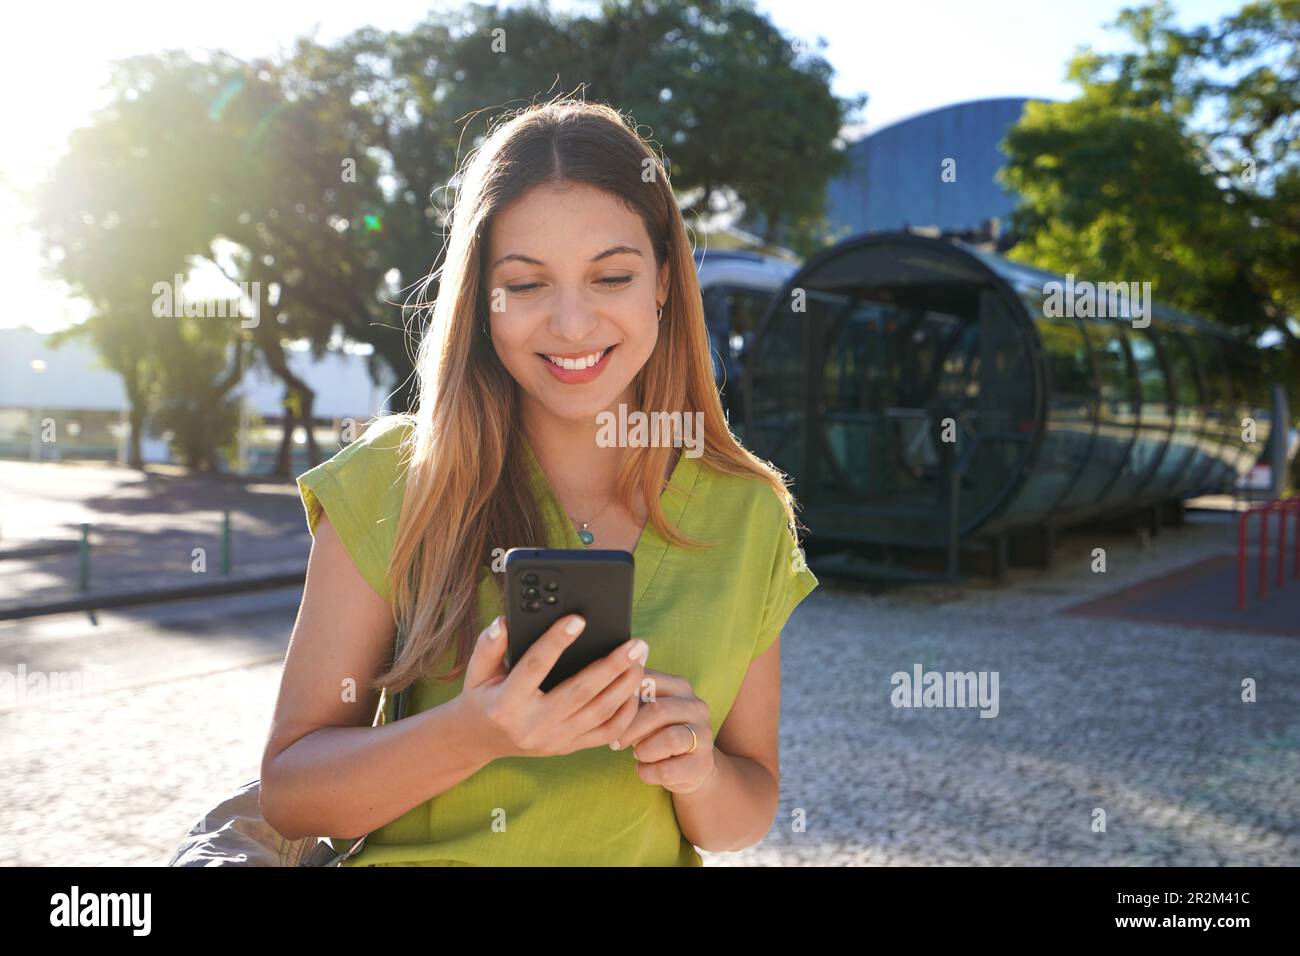 Portrait of happy smiling young woman using mobile phone in Curitiba, Brazil Stock Photo